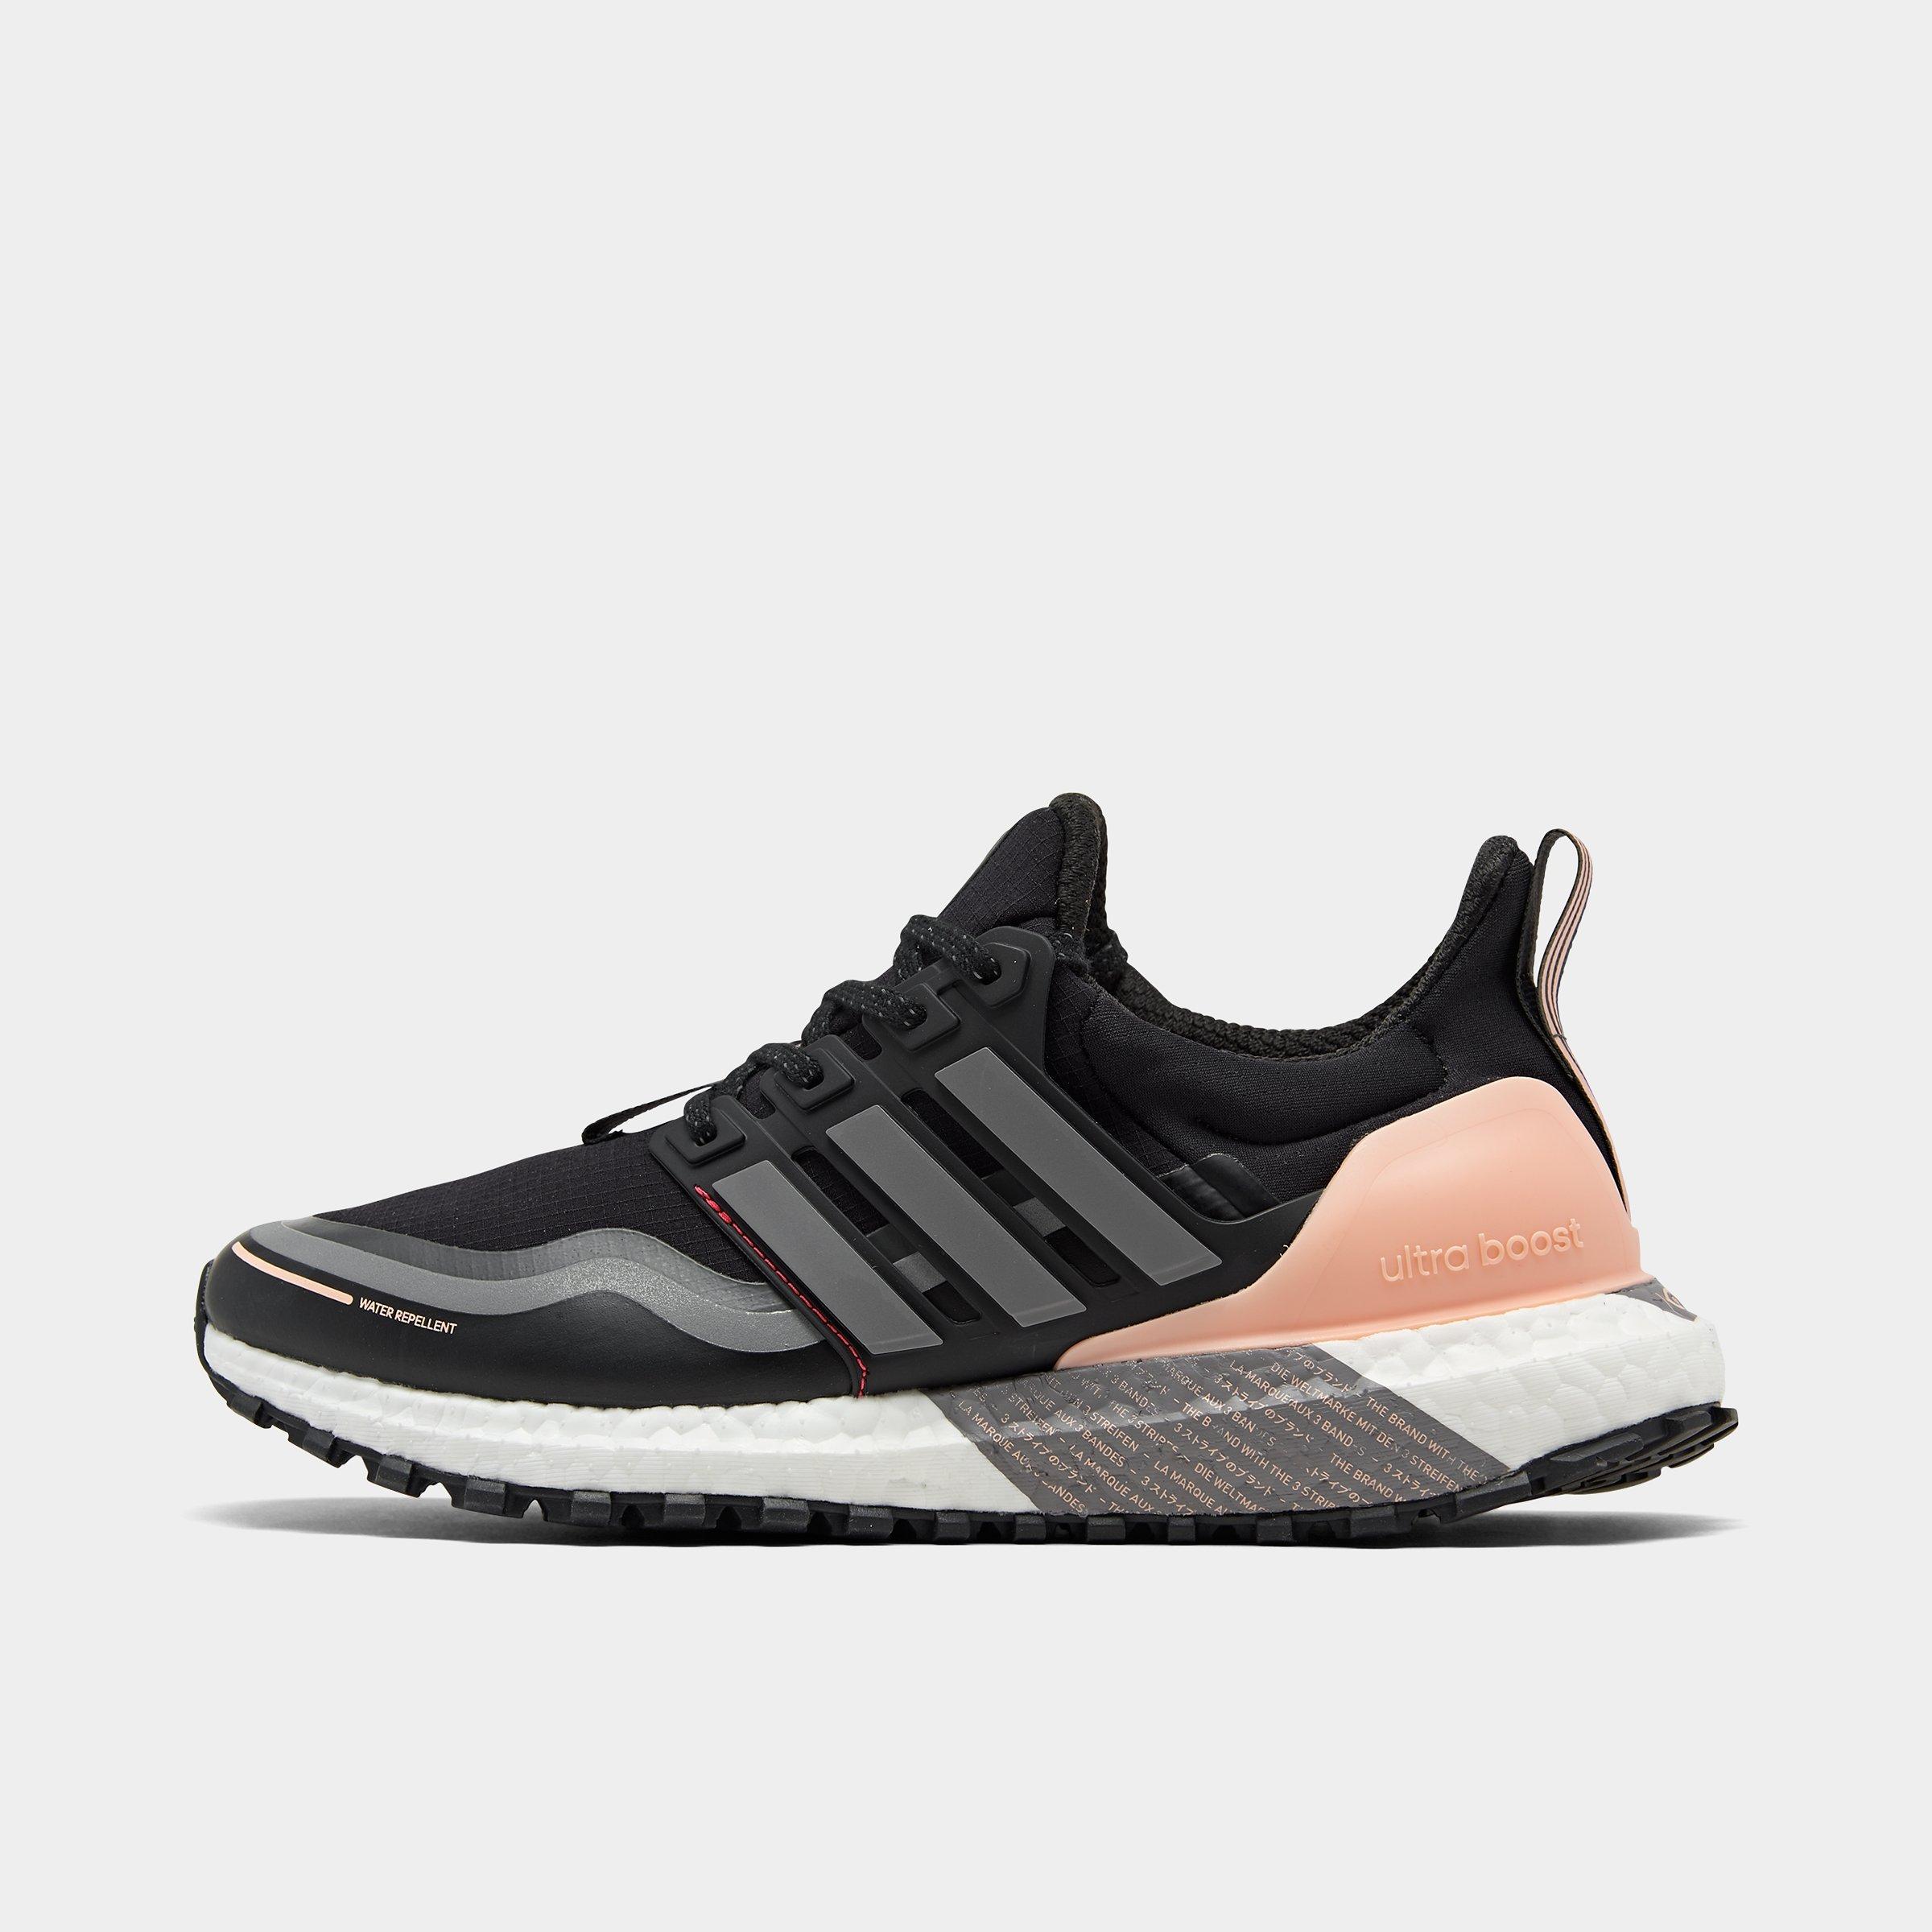 adidas ultra boost pink and black